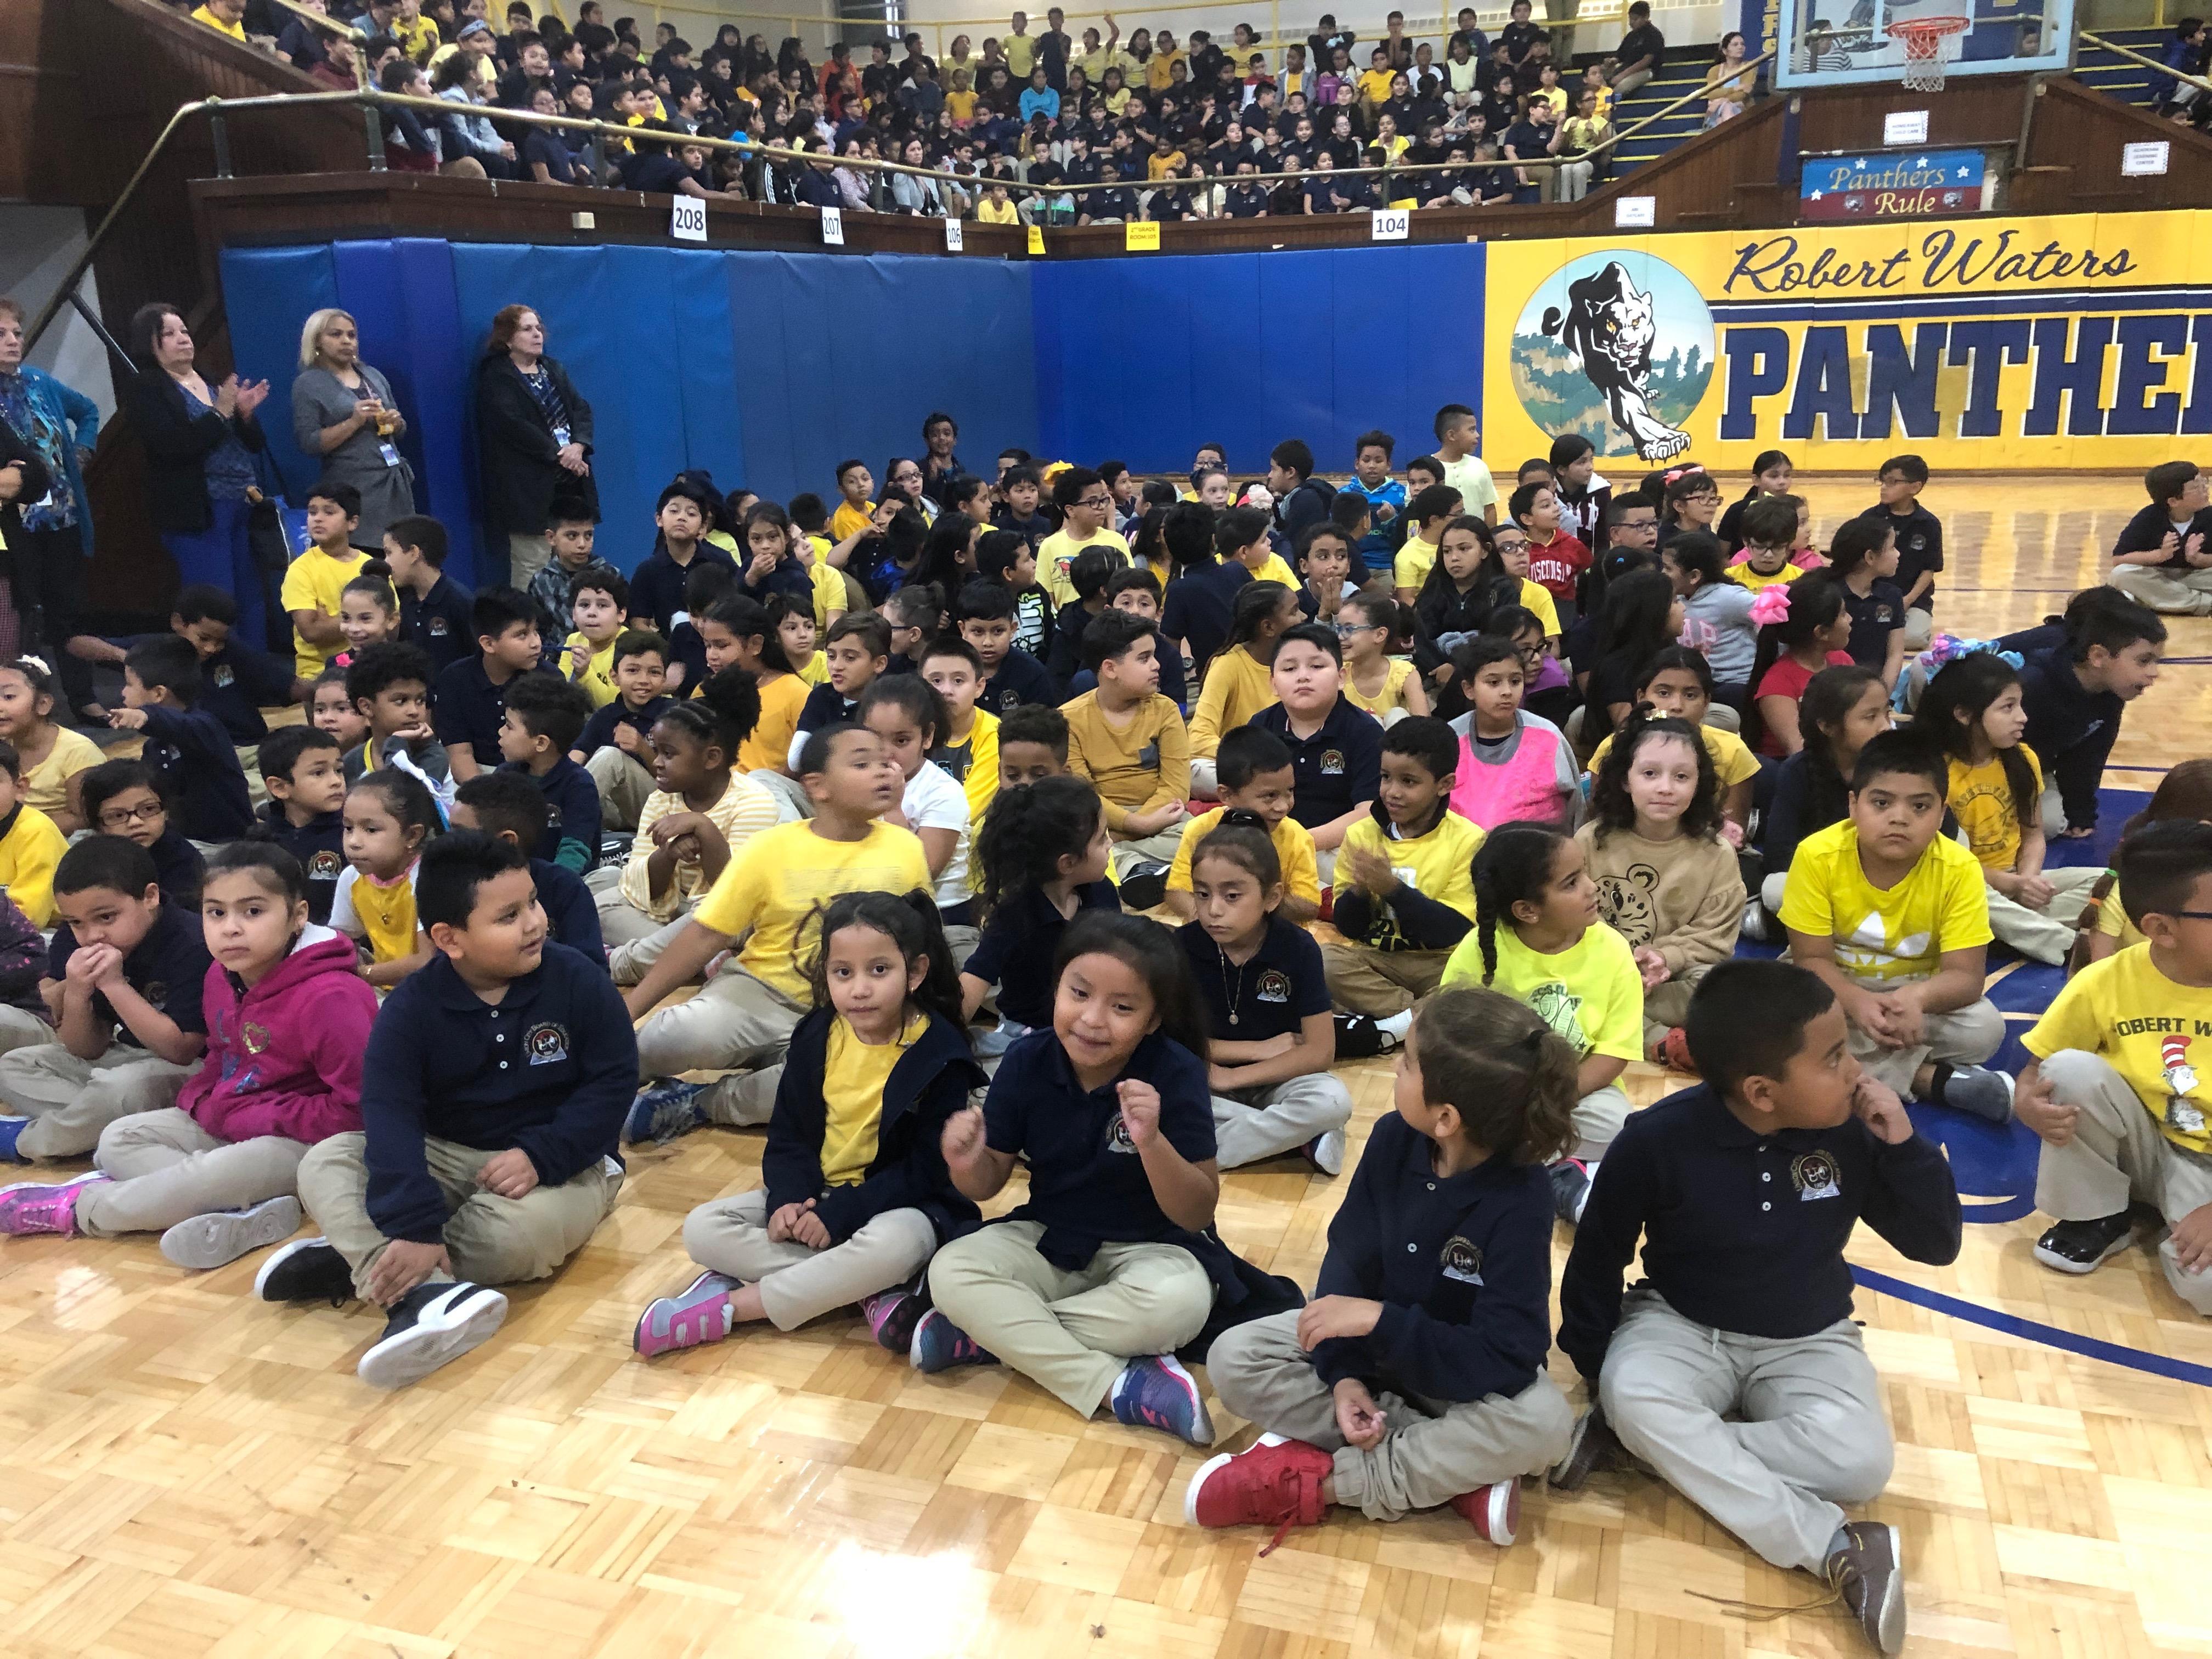 kids seated and waiting for the assembly